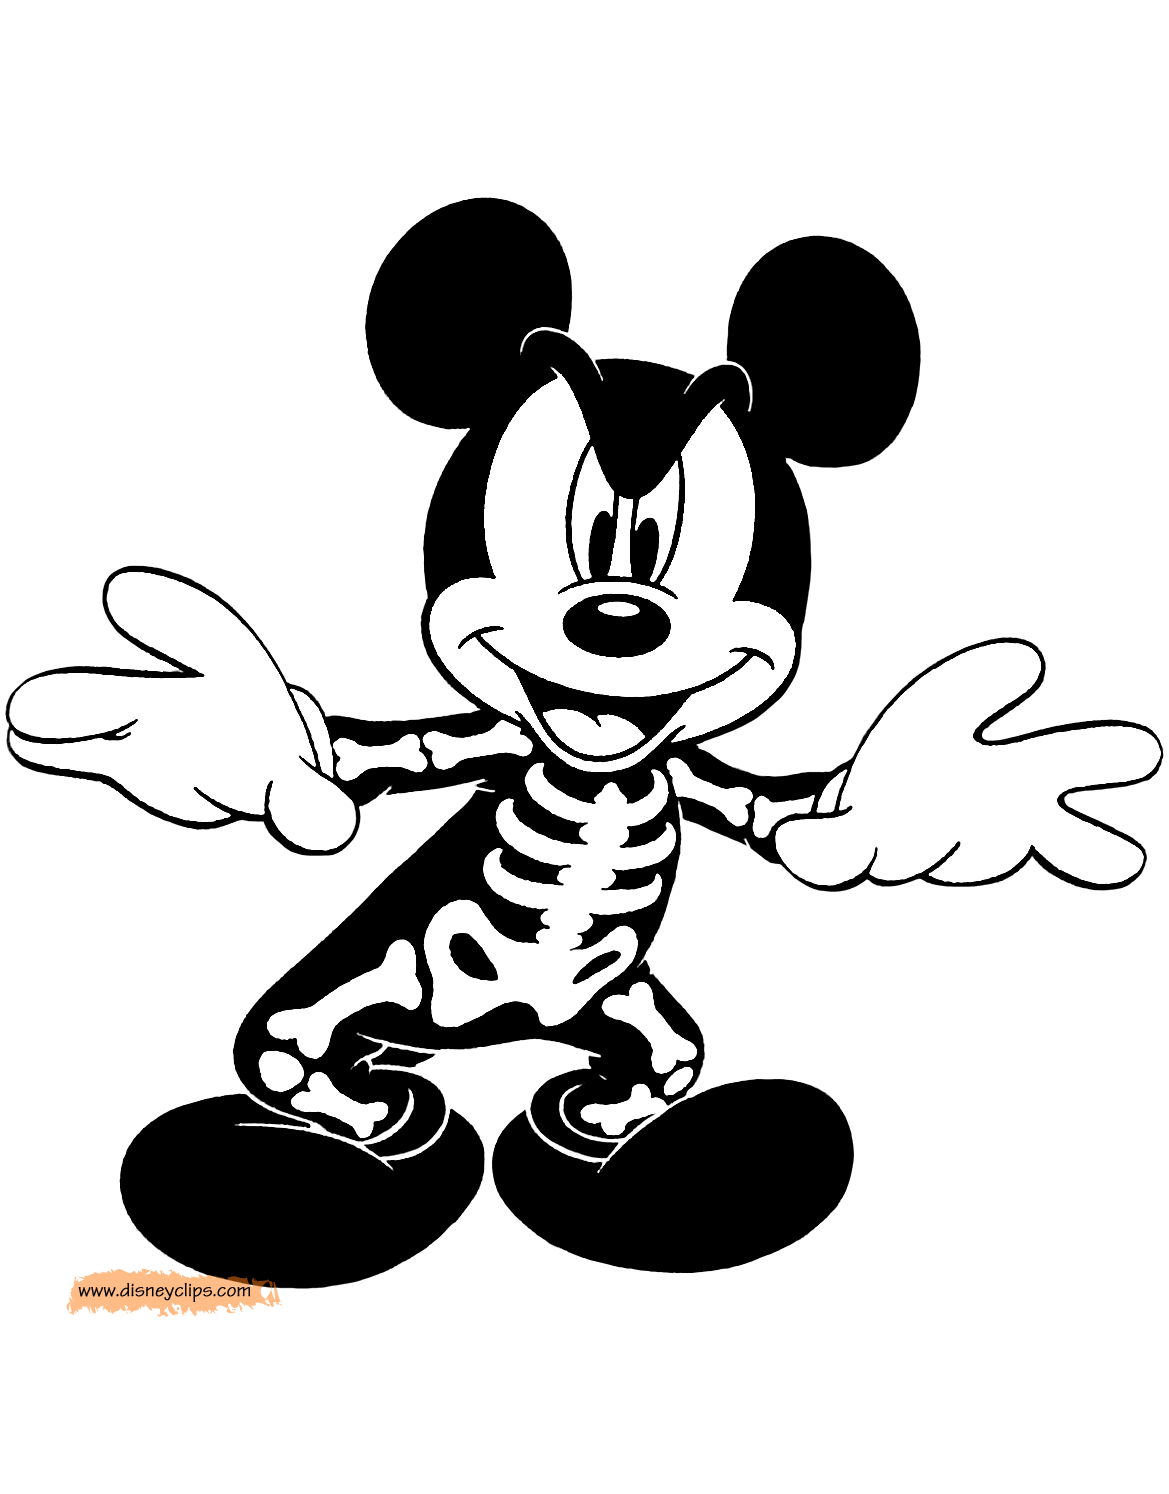 Printable Coloring Pages Cars Coloring Book Disneylloween Printable Coloring Pages Disneys World